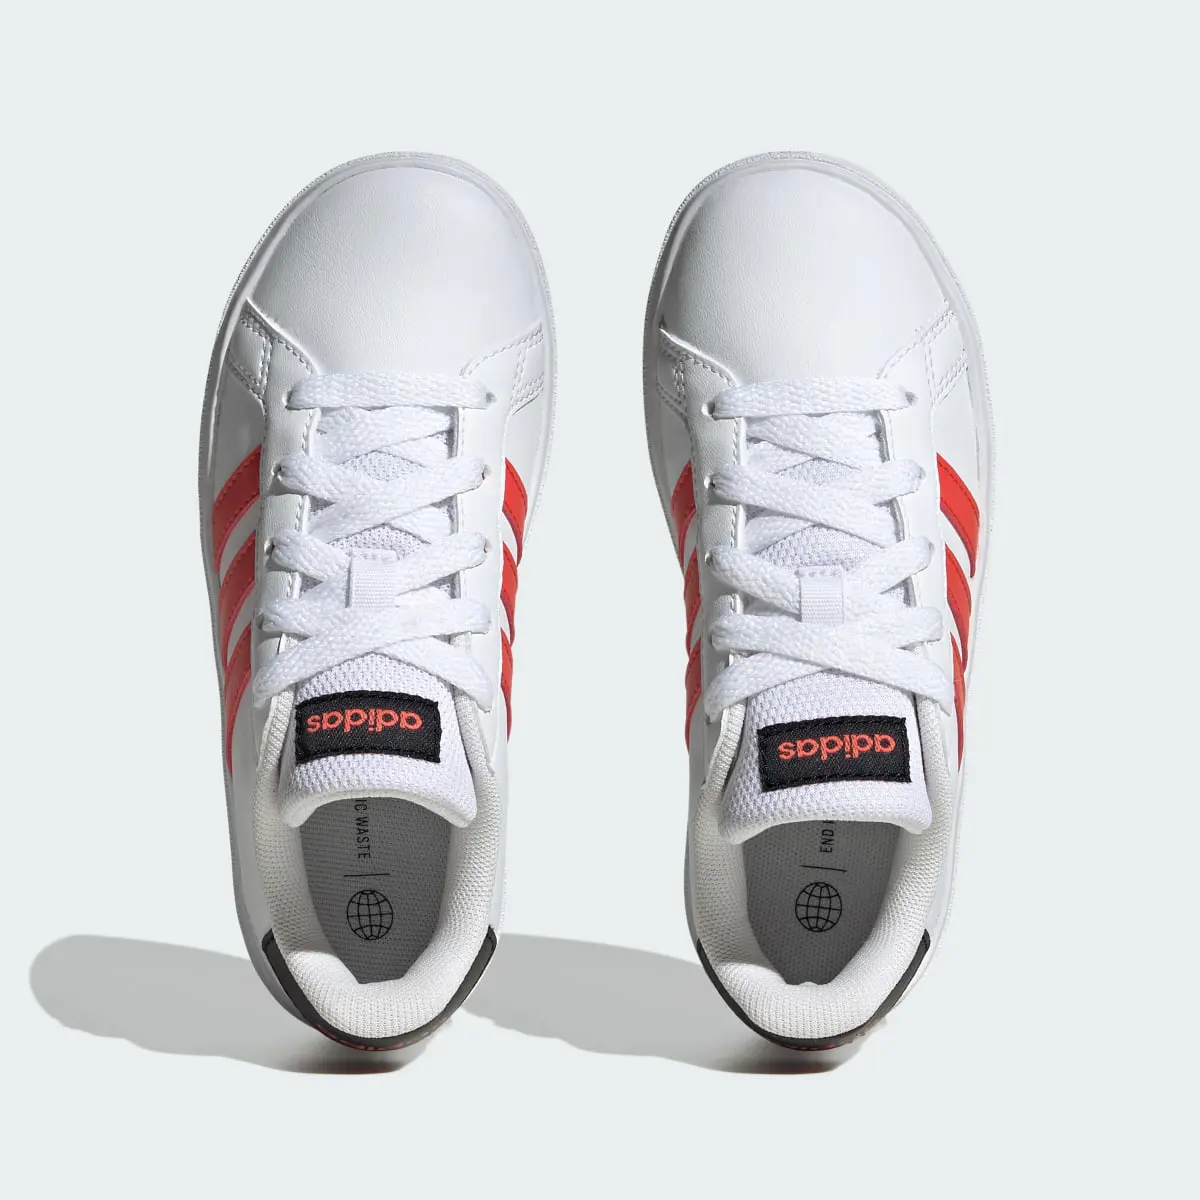 Adidas Grand Court Lifestyle Tennis Lace-Up Shoes. 3